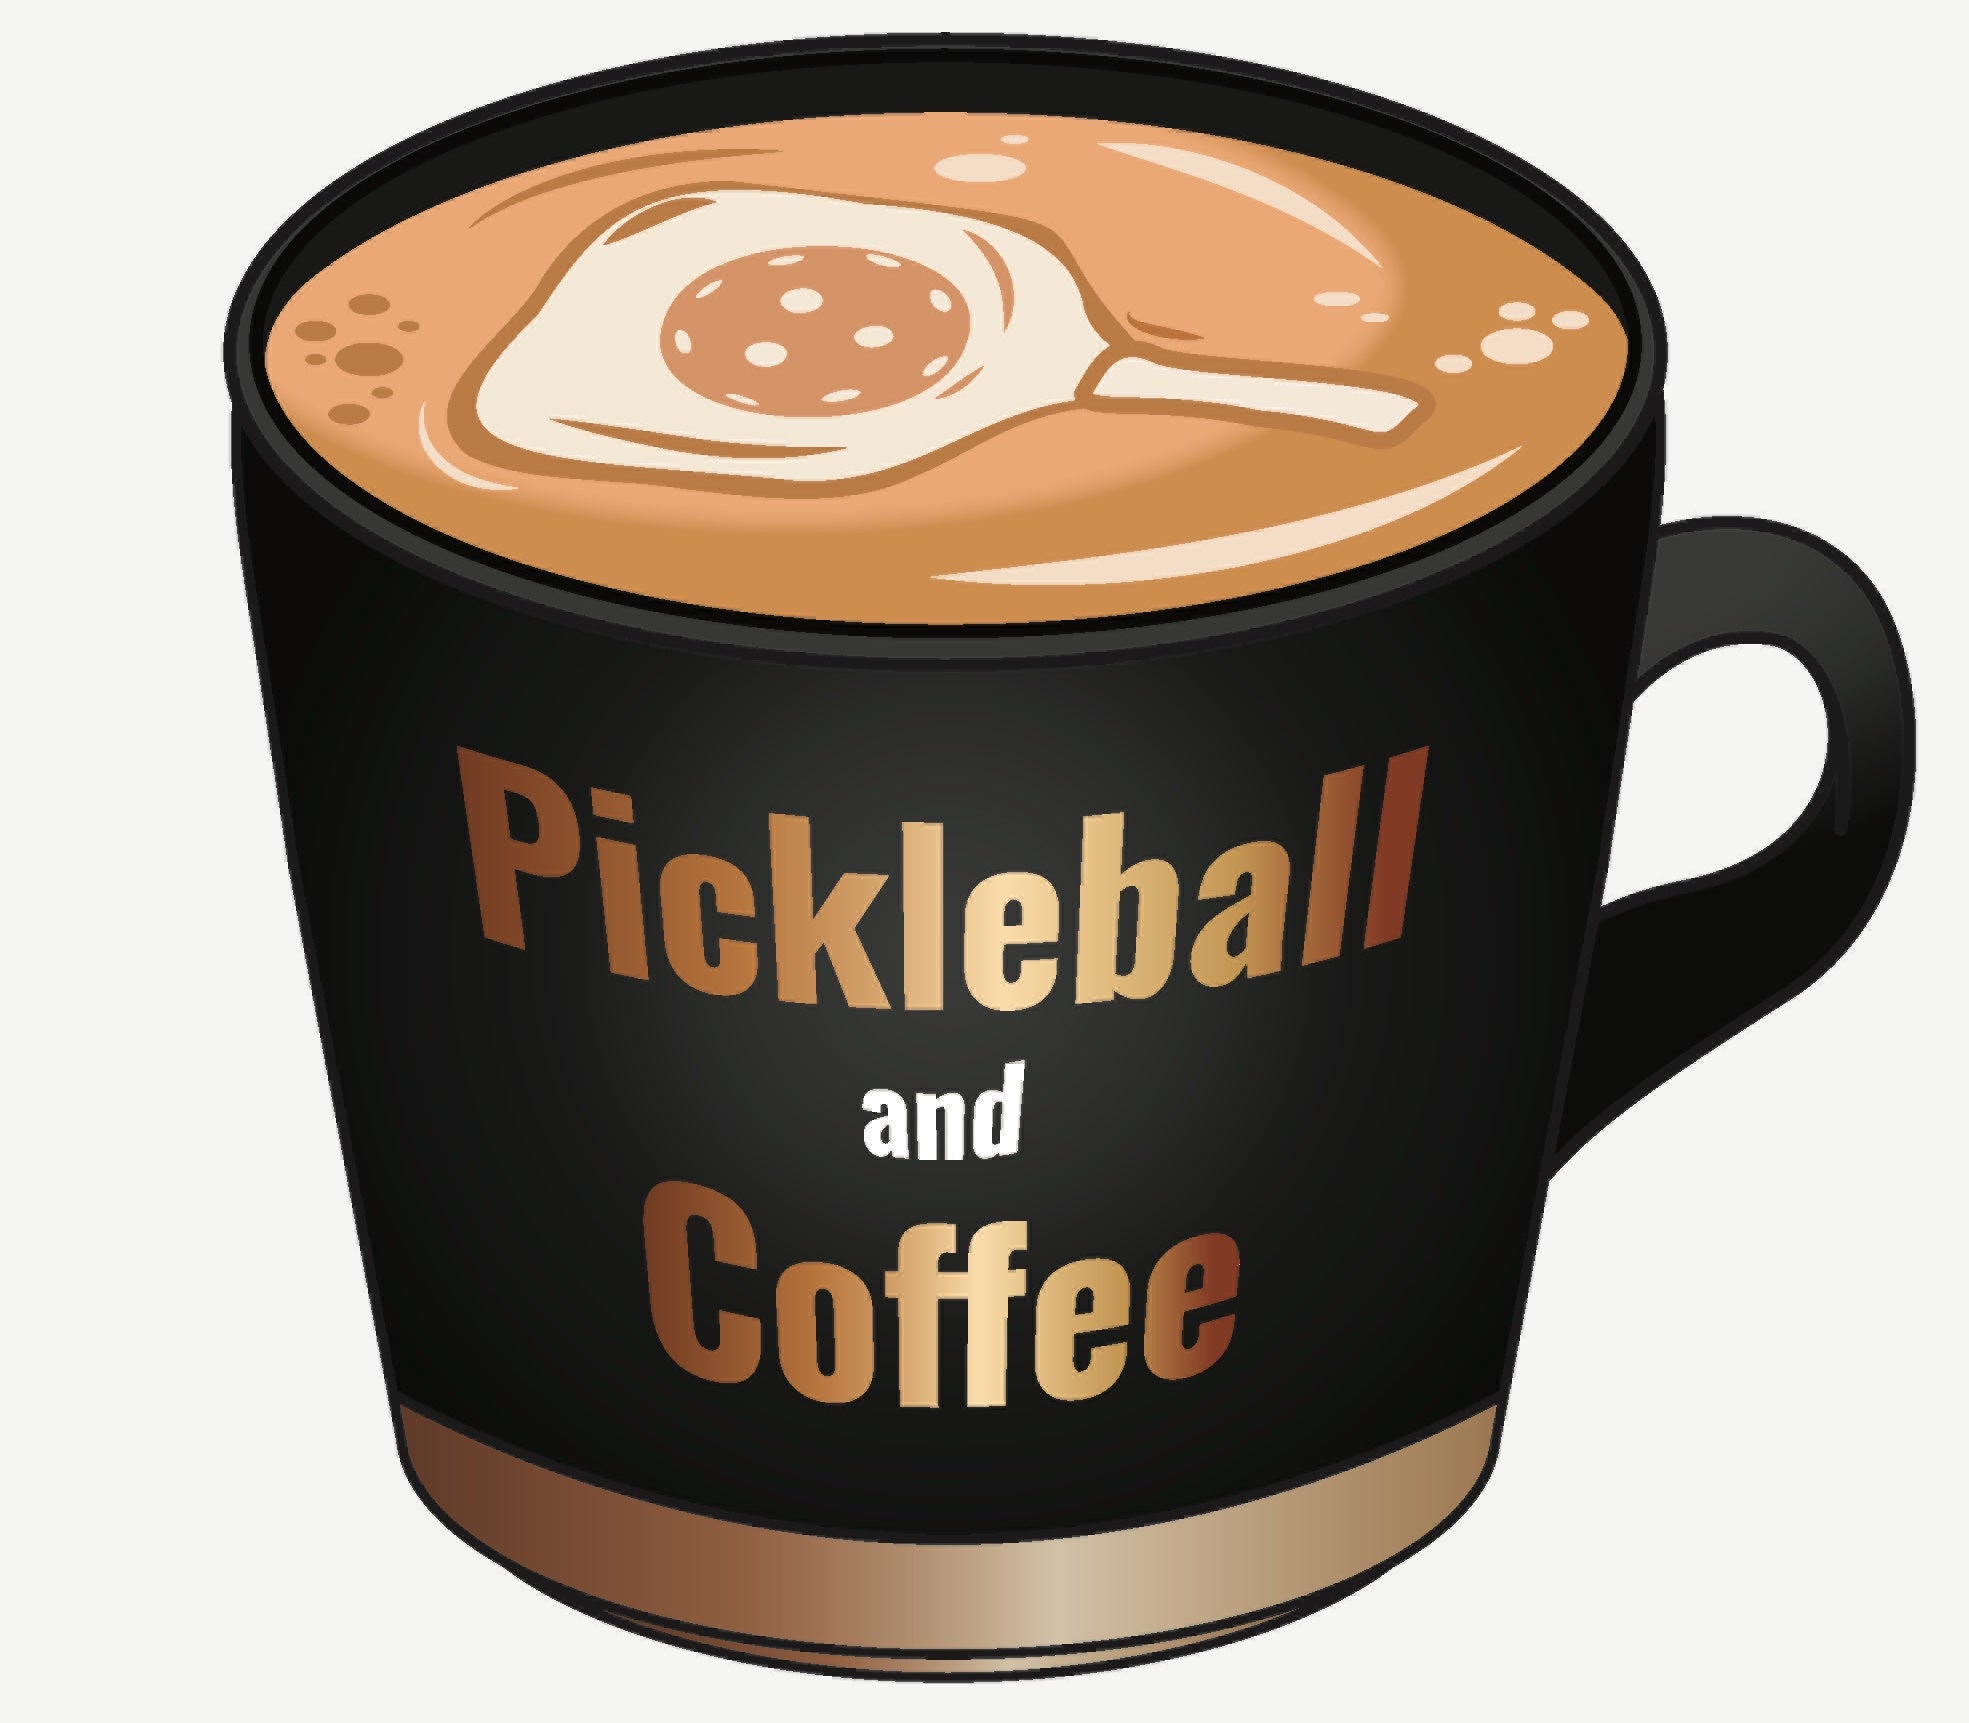 Pickleball and Coffee